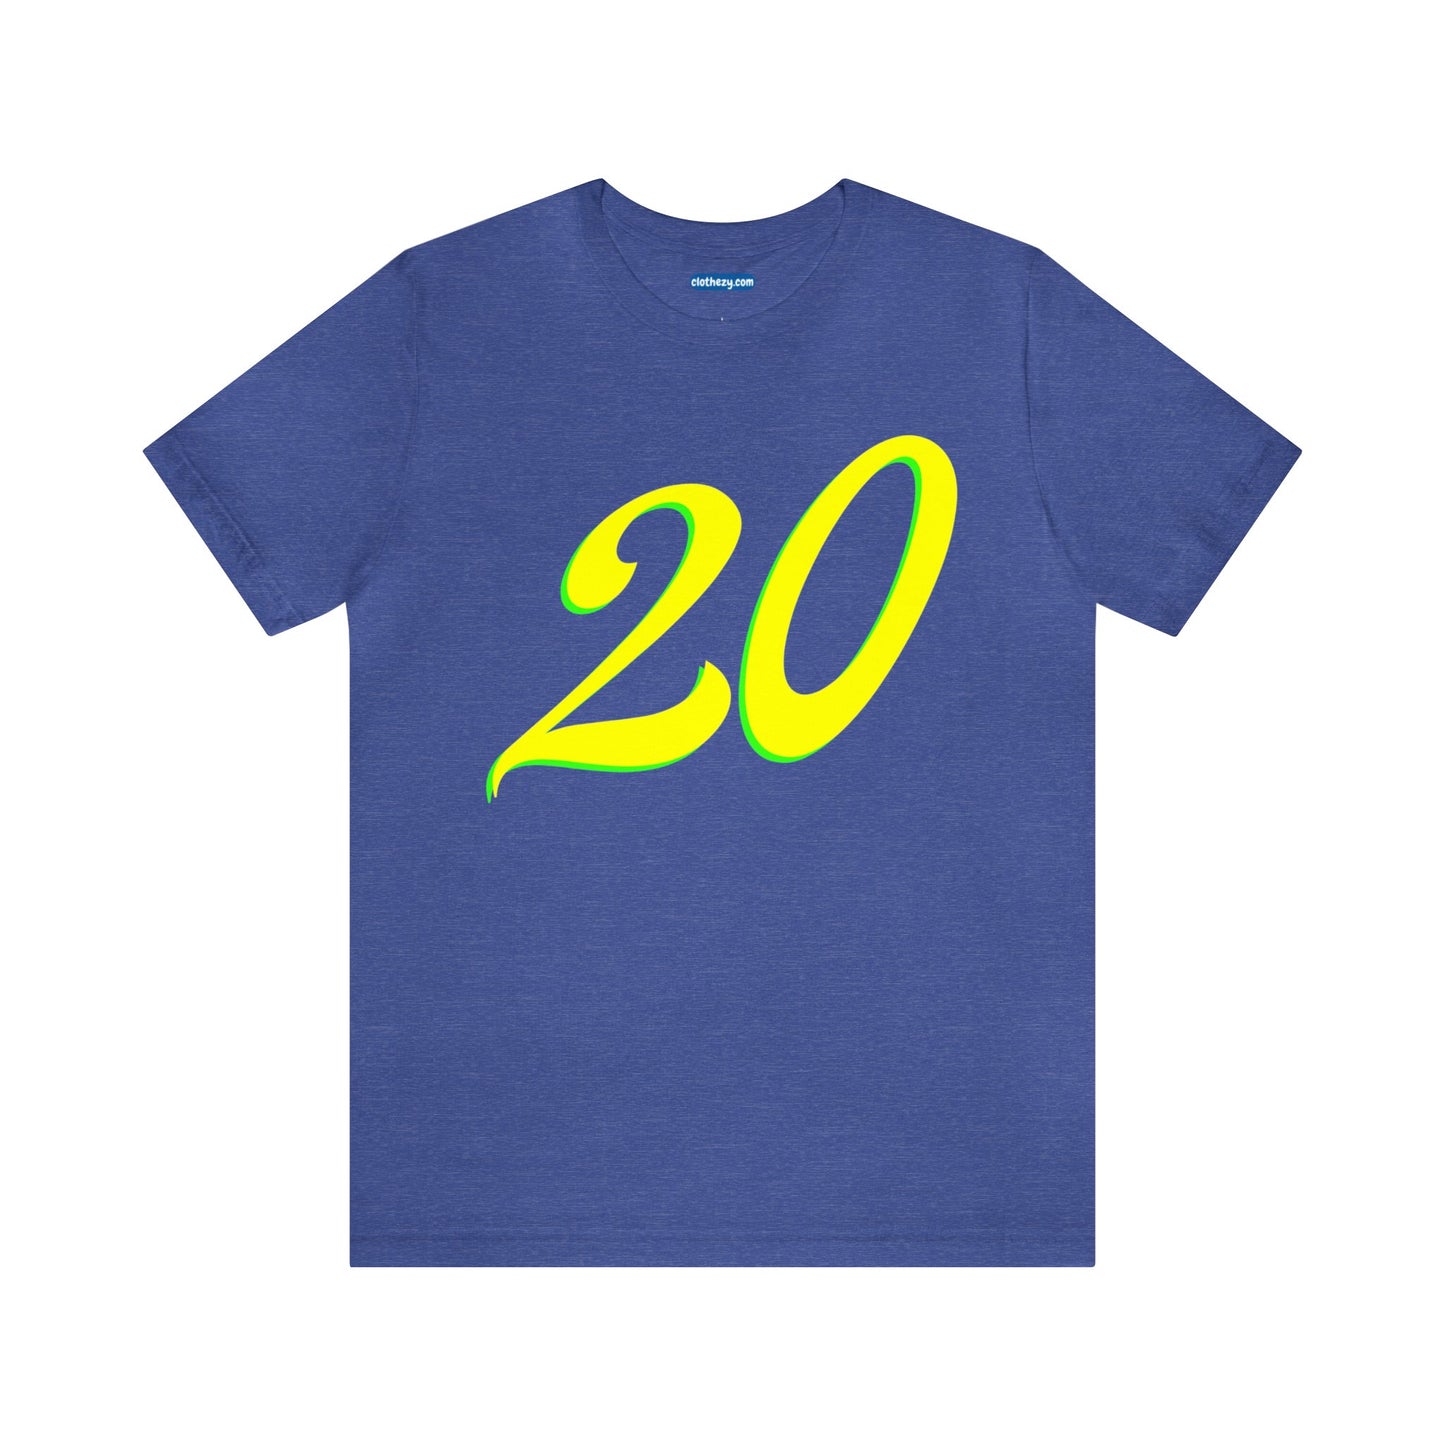 Number 20 Design - Soft Cotton Tee for birthdays and celebrations, Gift for friends and family, Multiple Options by clothezy.com in Navy Size Small - Buy Now